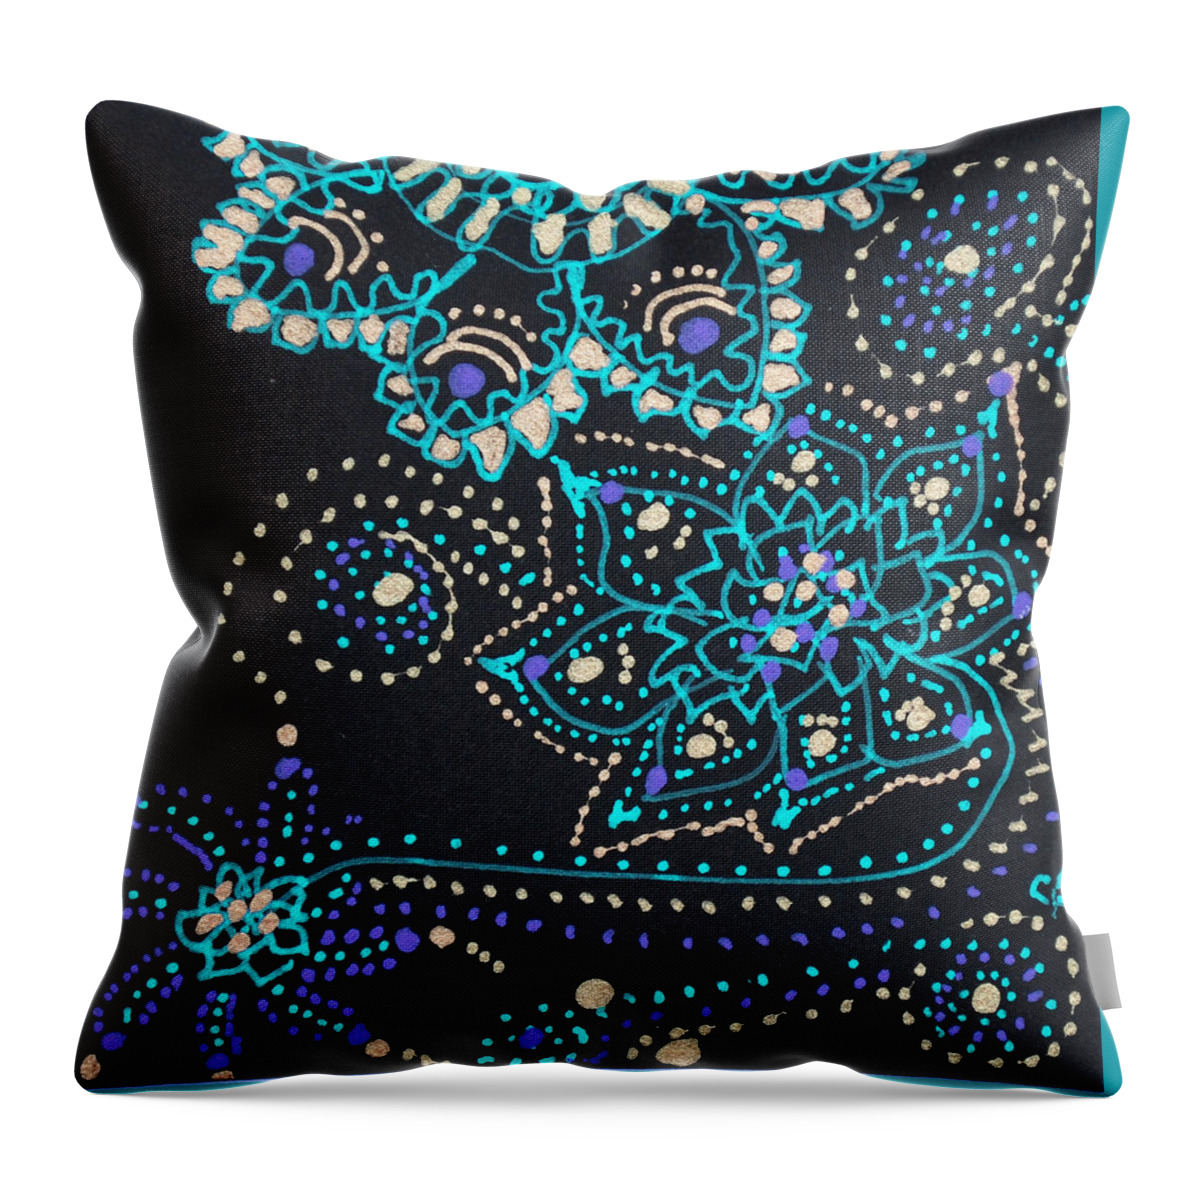 Zentangle Throw Pillow featuring the drawing Midnite Sparkle by Carole Brecht